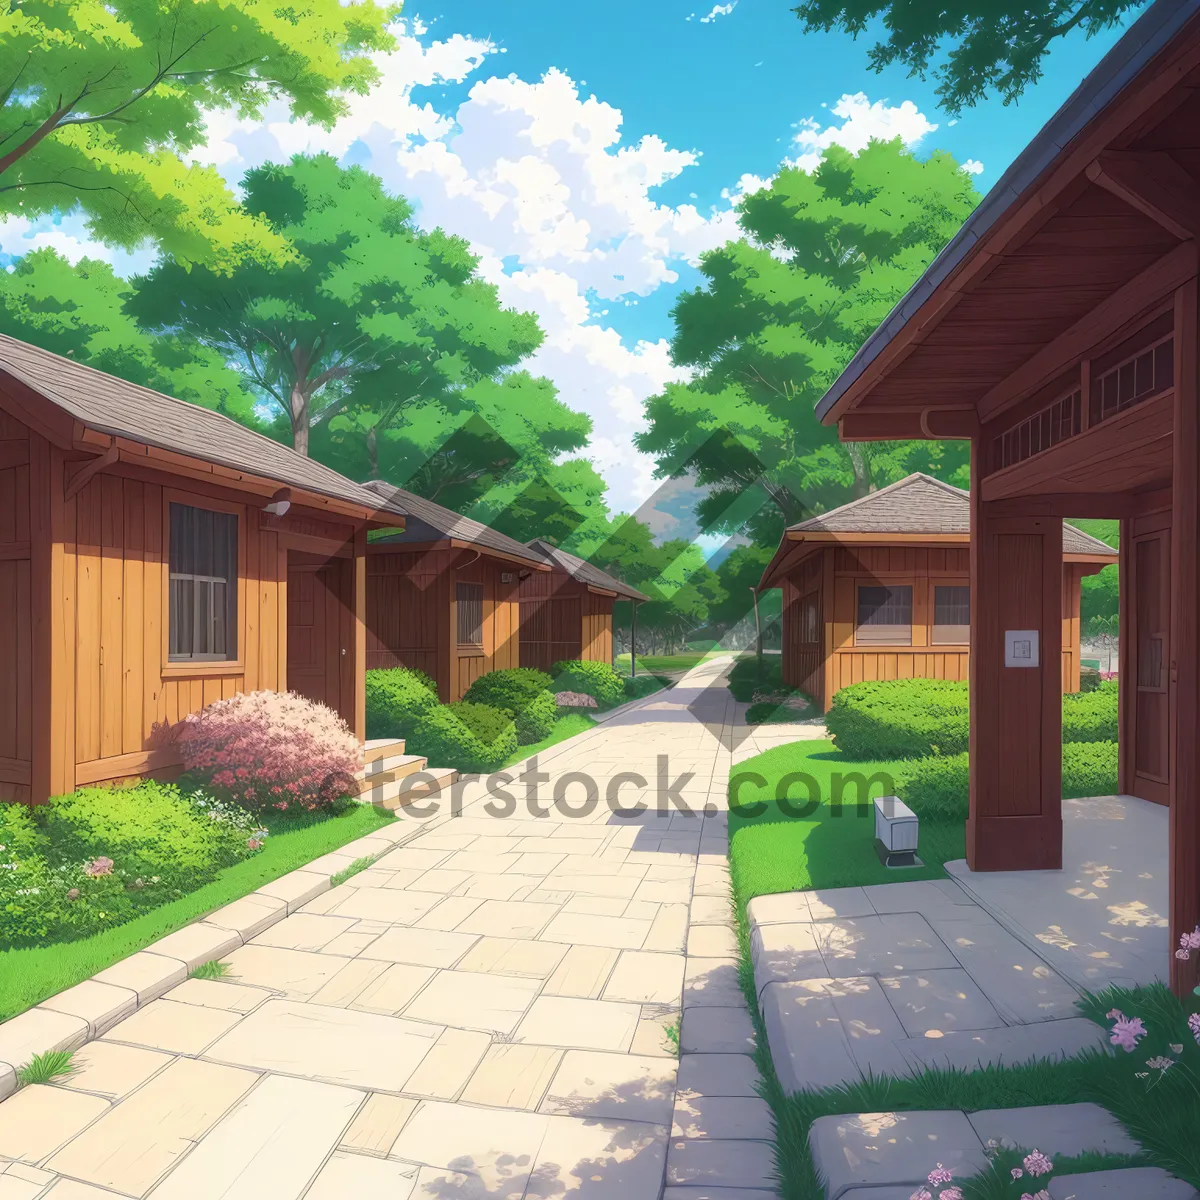 Picture of Modern suburban bungalow with landscaped patio area